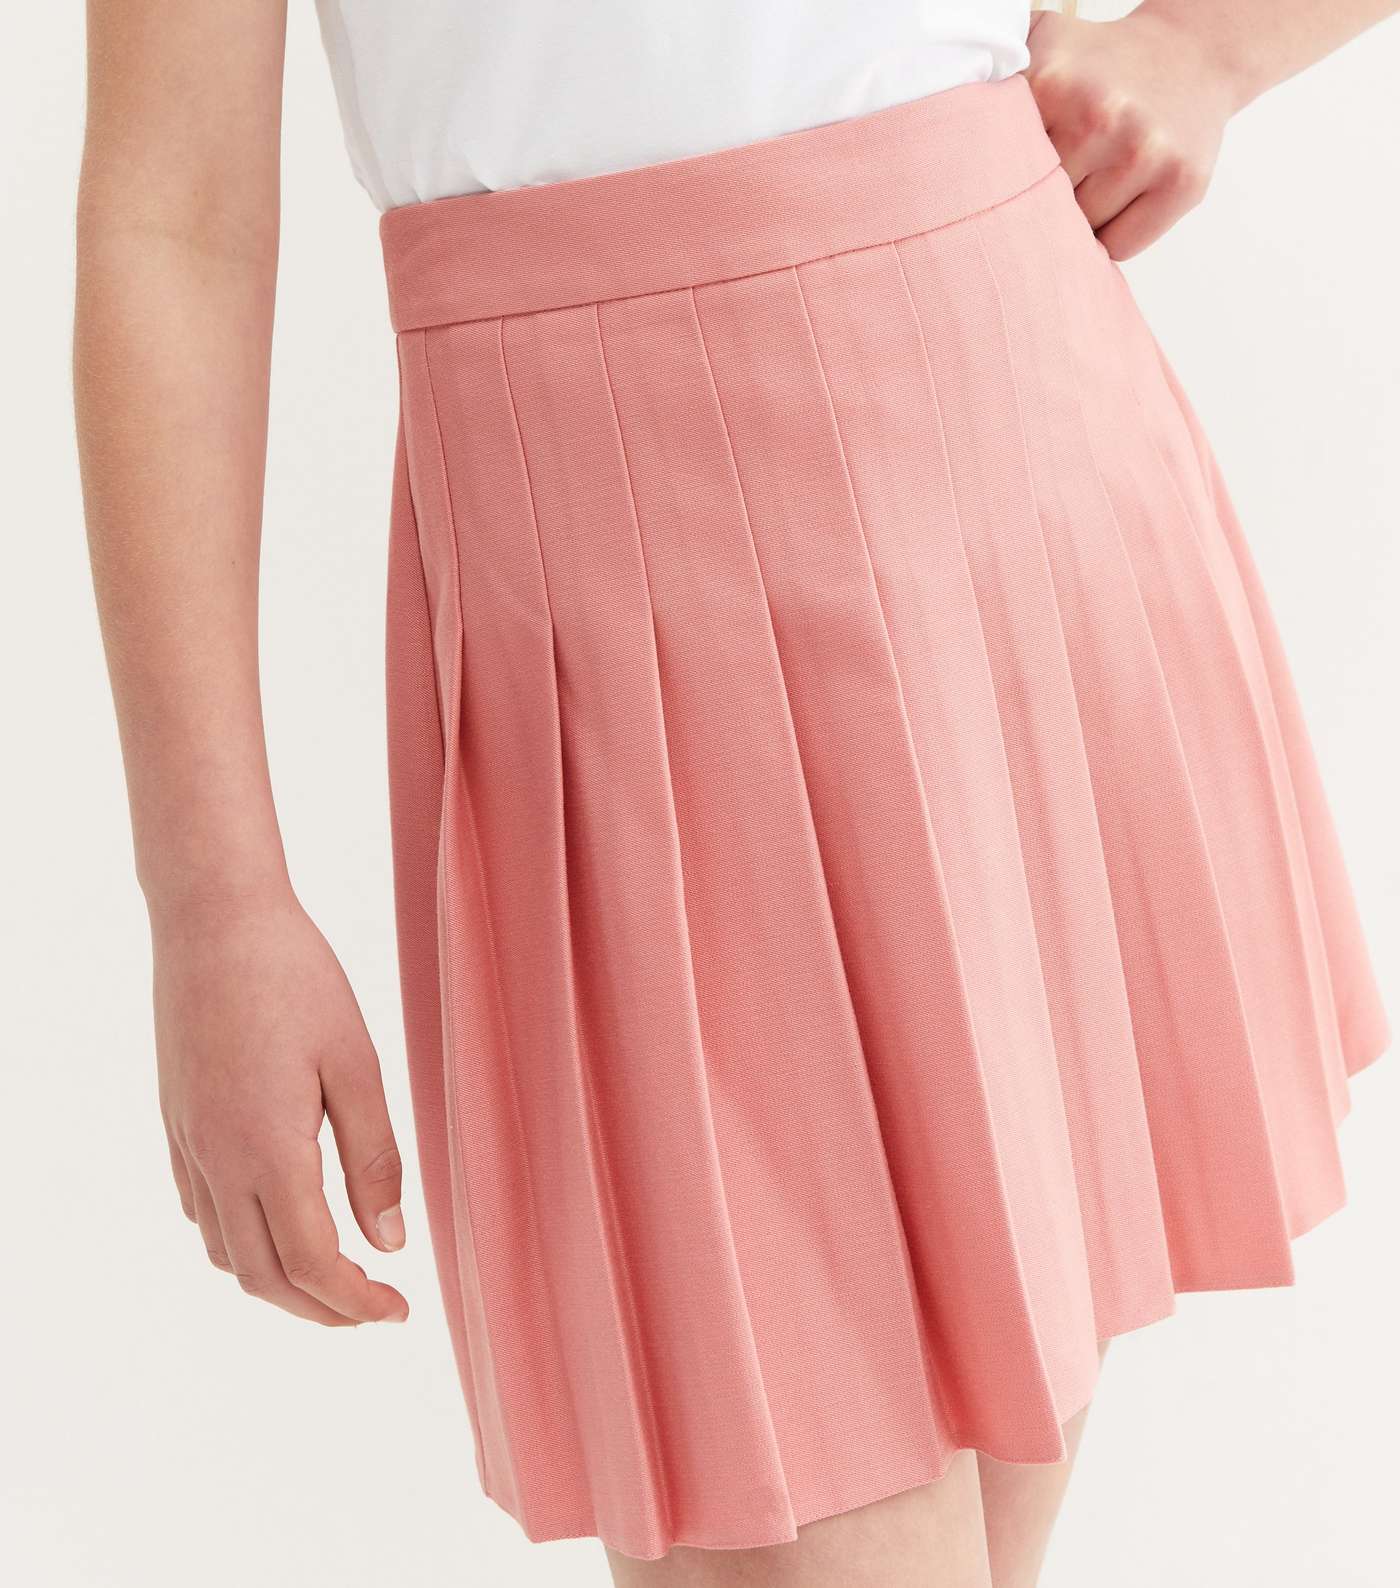 Girls Pale Pink Pleated Tennis Skirt Image 3